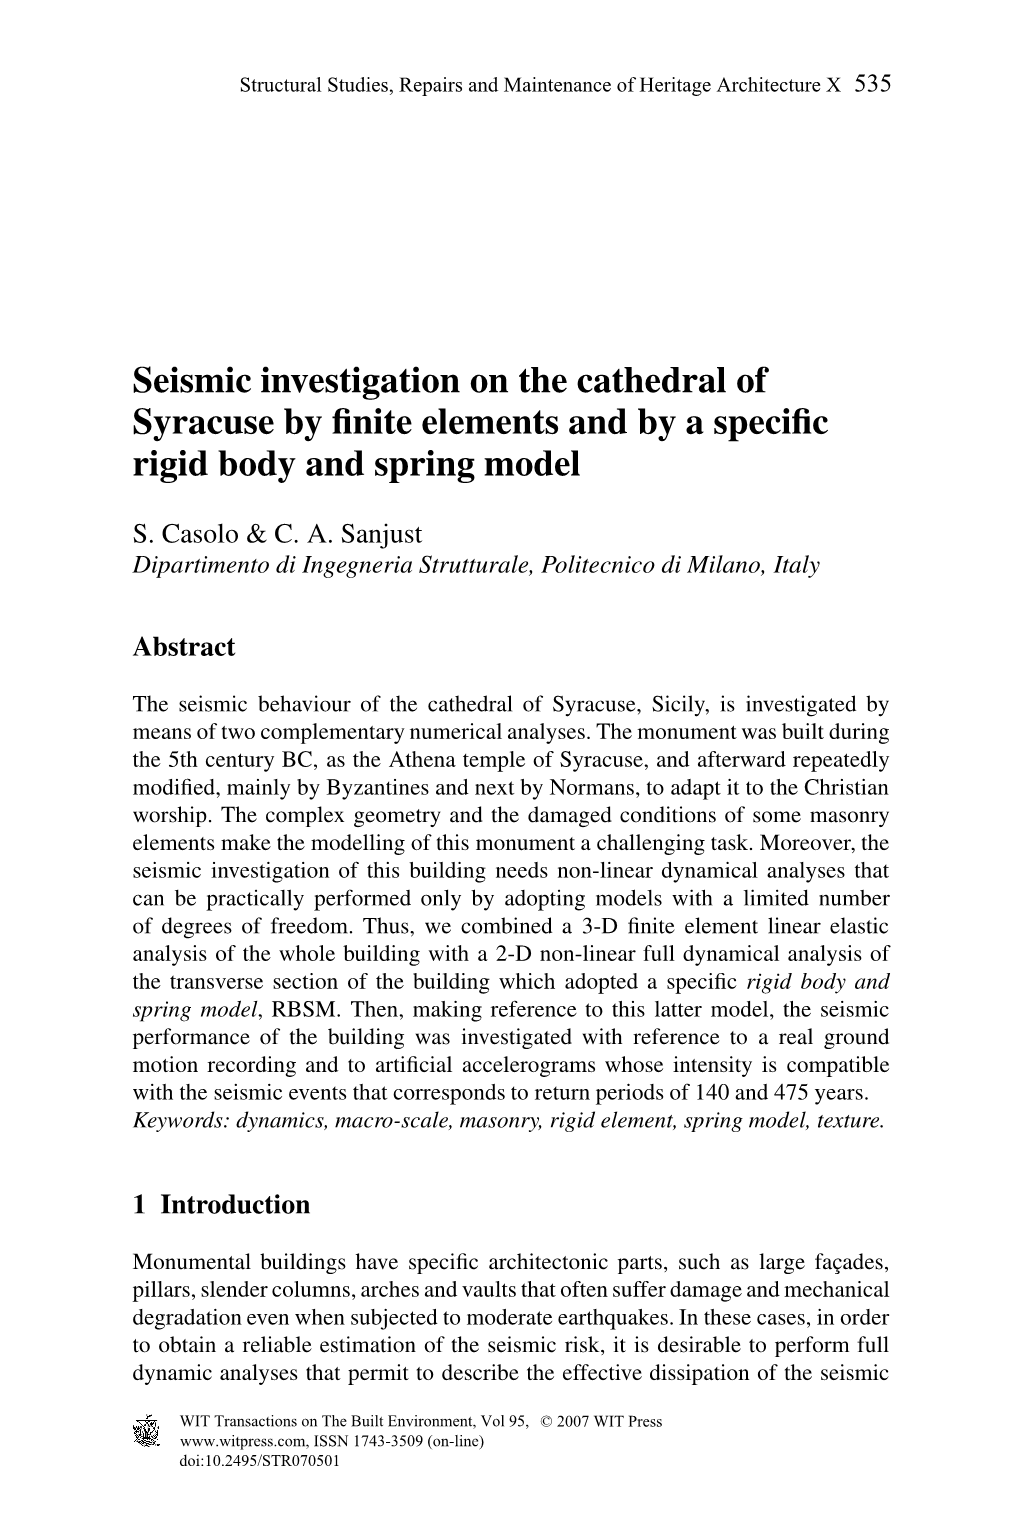 Seismic Investigation on the Cathedral of Syracuse by Finite Elements And